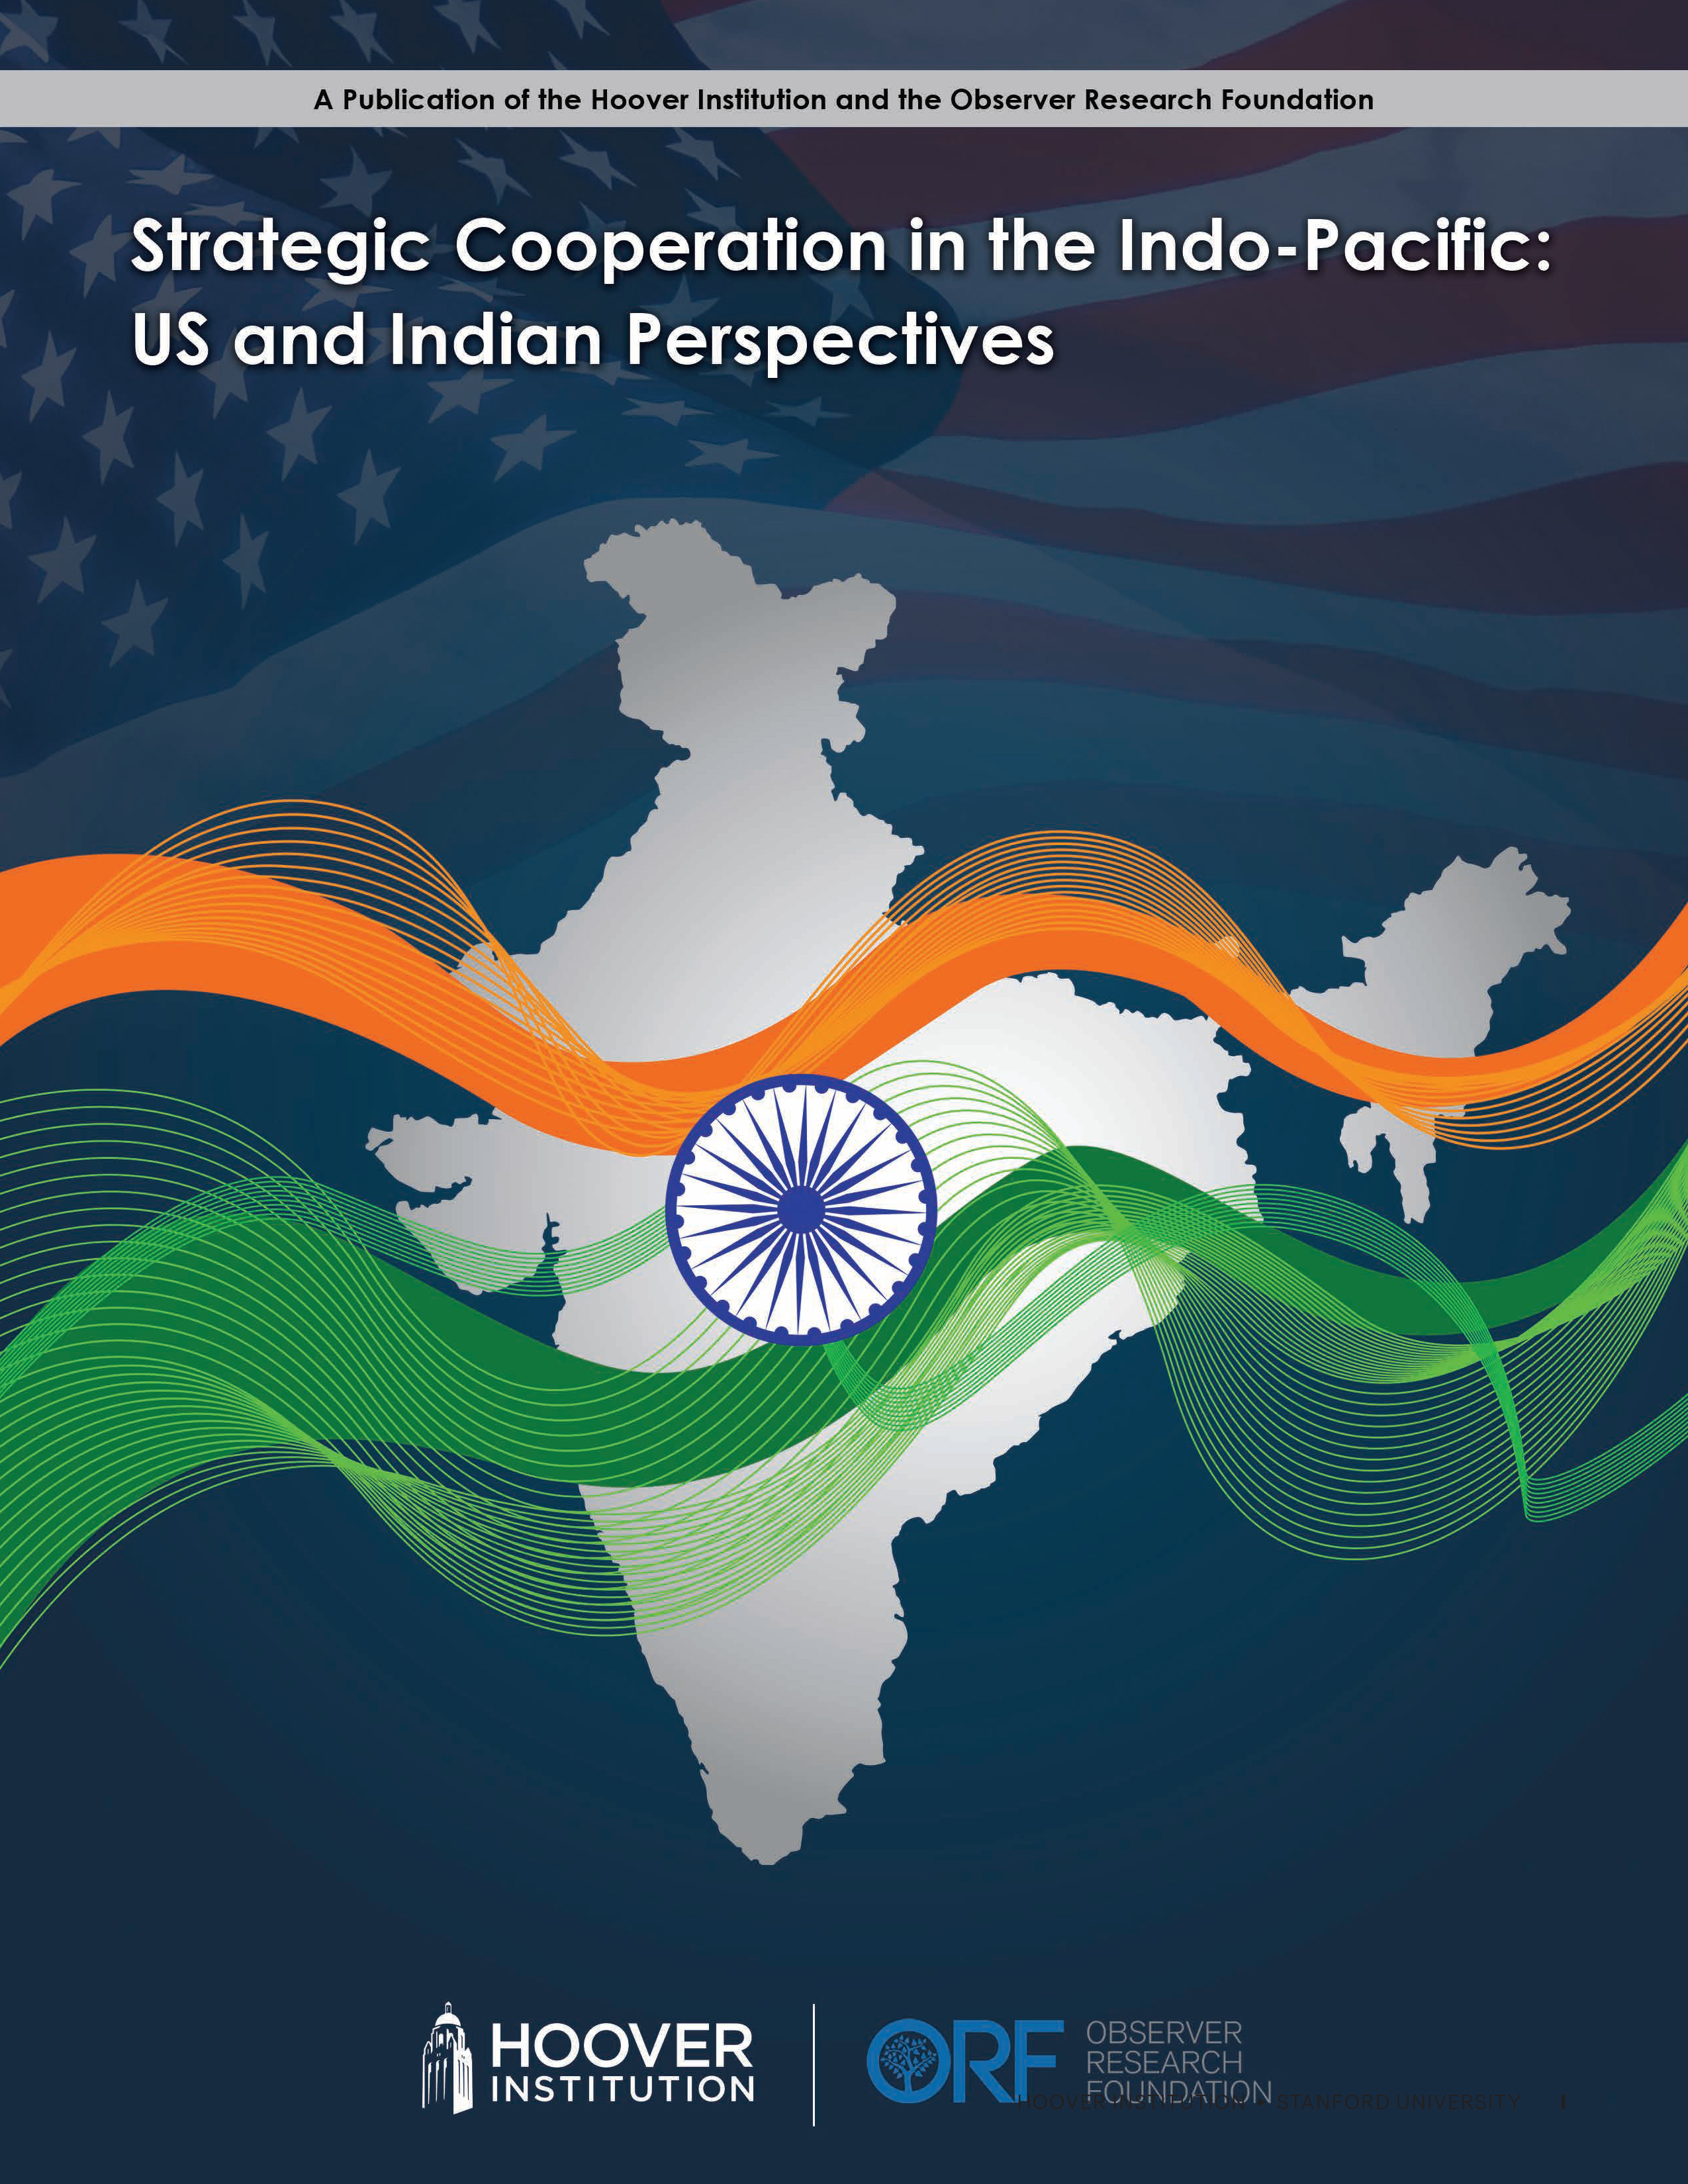 Strategic Cooperation In The Indo-Pacific: US And Indian Perspectives